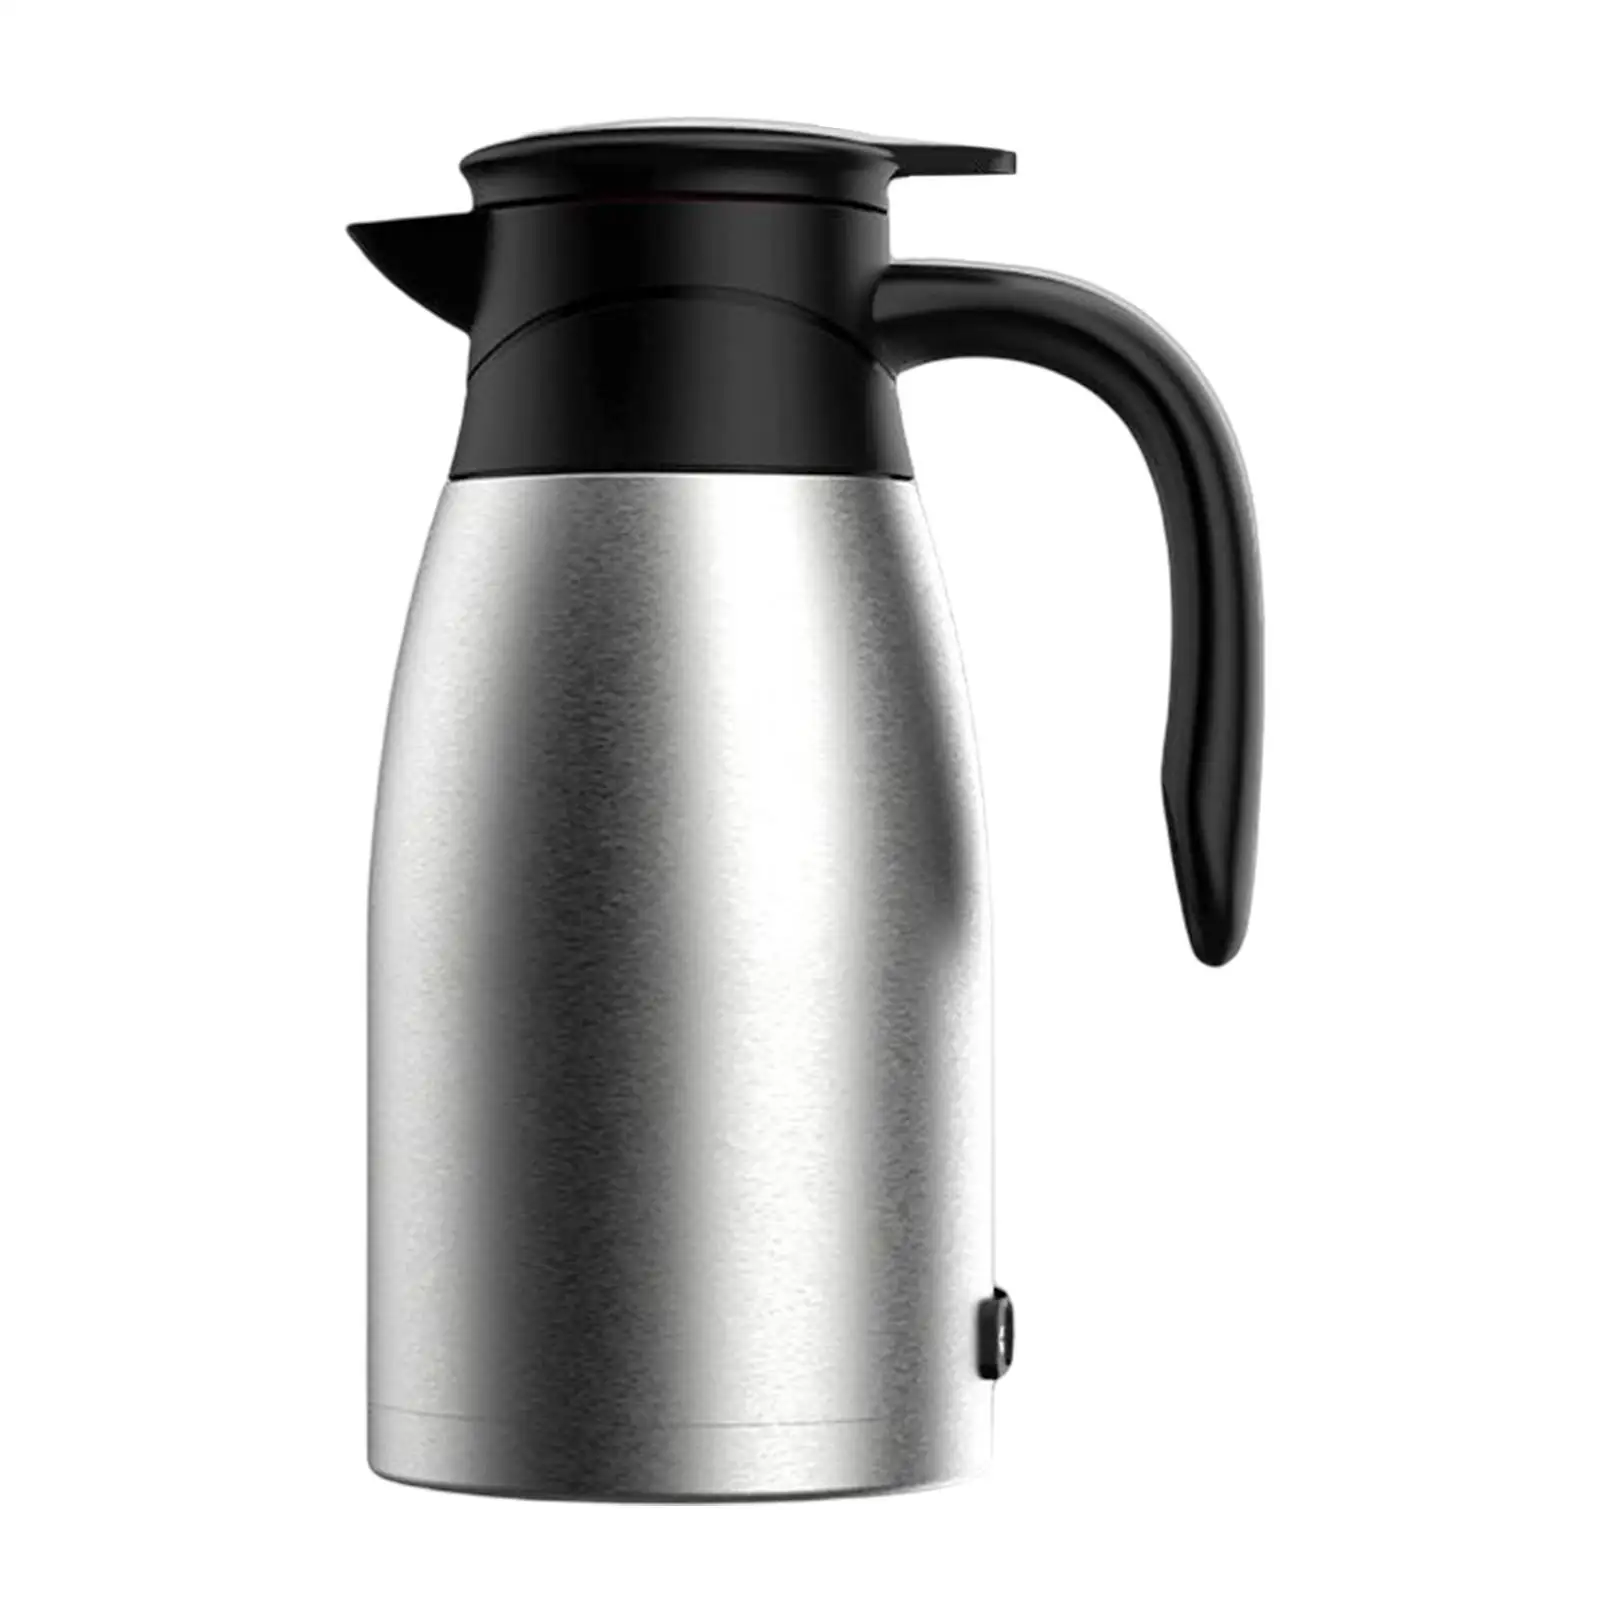 12 Kettle Boiler 1400ml Temperature Display Heating Cup for Travel Outdoor